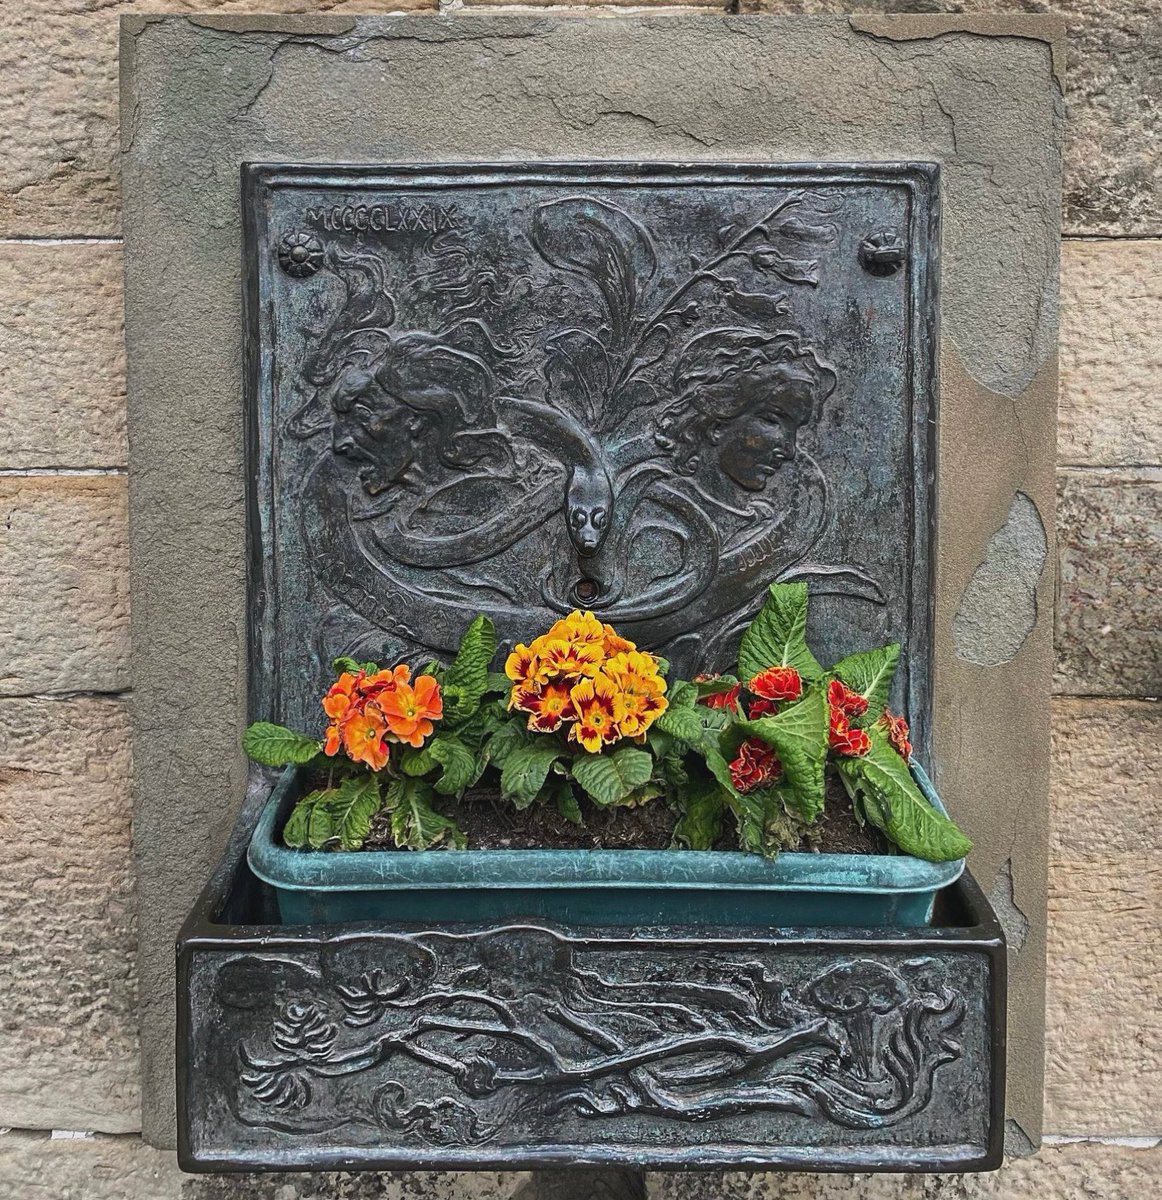 Have you visited The Witches' Well in Edinburgh? Dedicated to the innocent women who lost their lives during the Scottish witch trials, it is the only memorial of its kind in the city. Next time you are visiting Edinburgh Castle, take a right as you enter the esplanade.